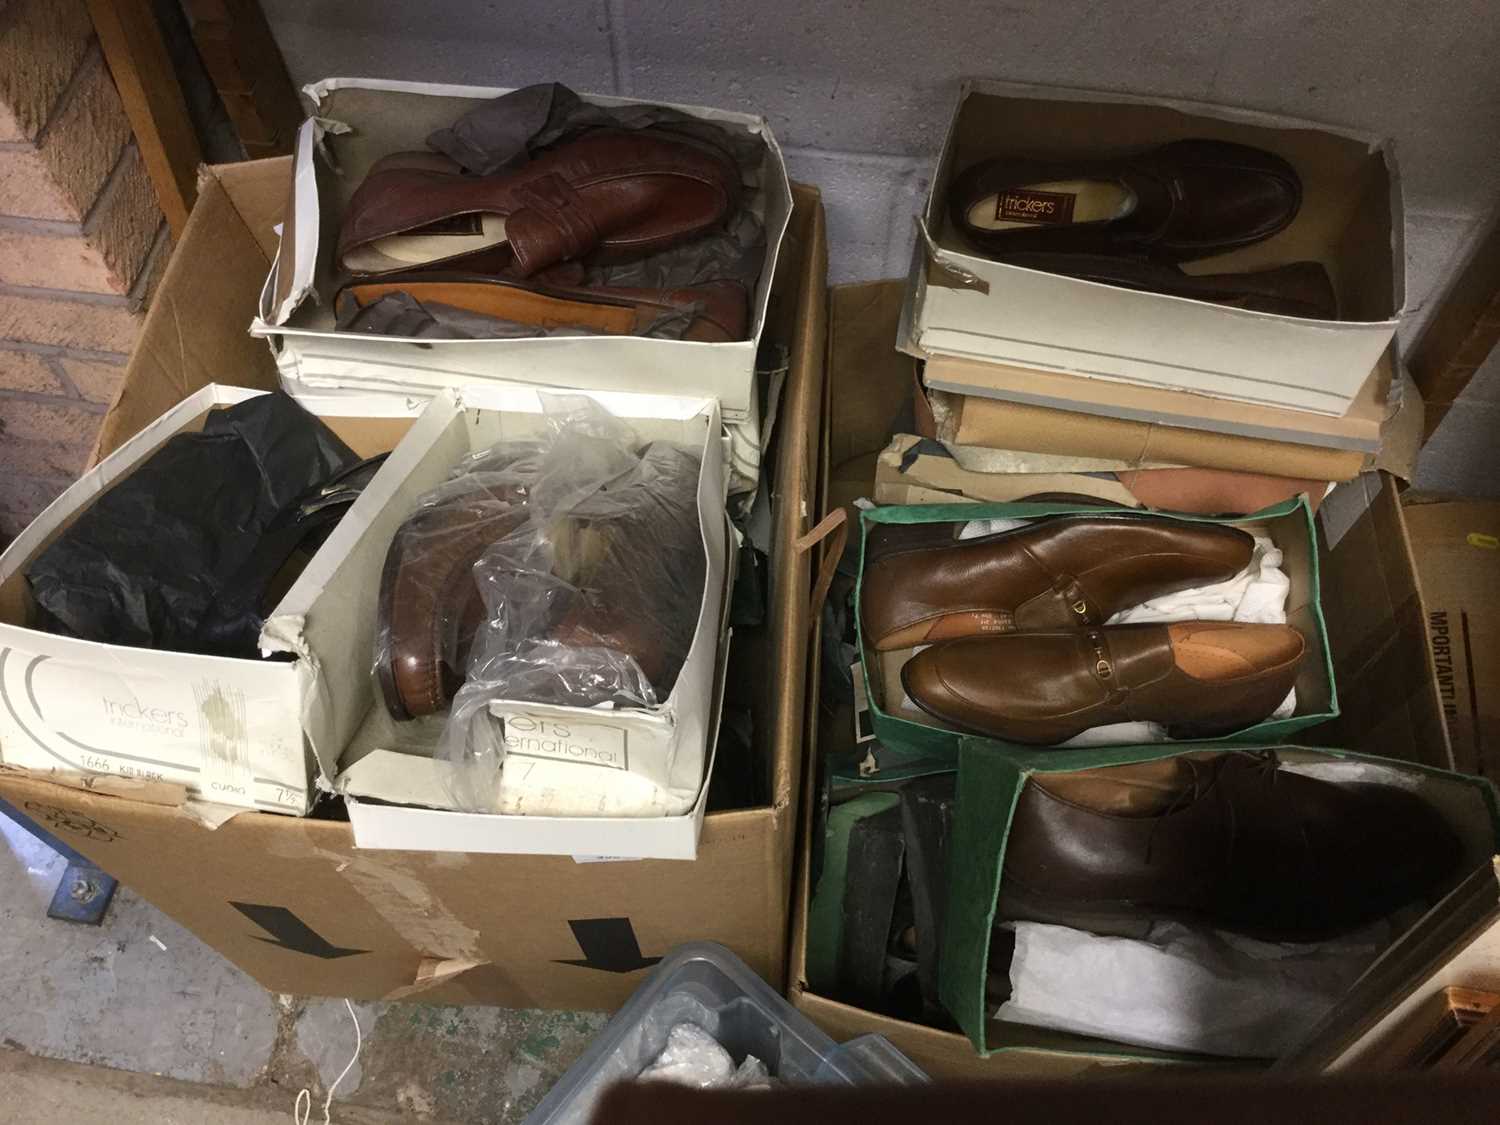 Large quantity of Gentlemen's vintage shoes, makes include Trickers, Technic, Loakes. Mixed sizes.